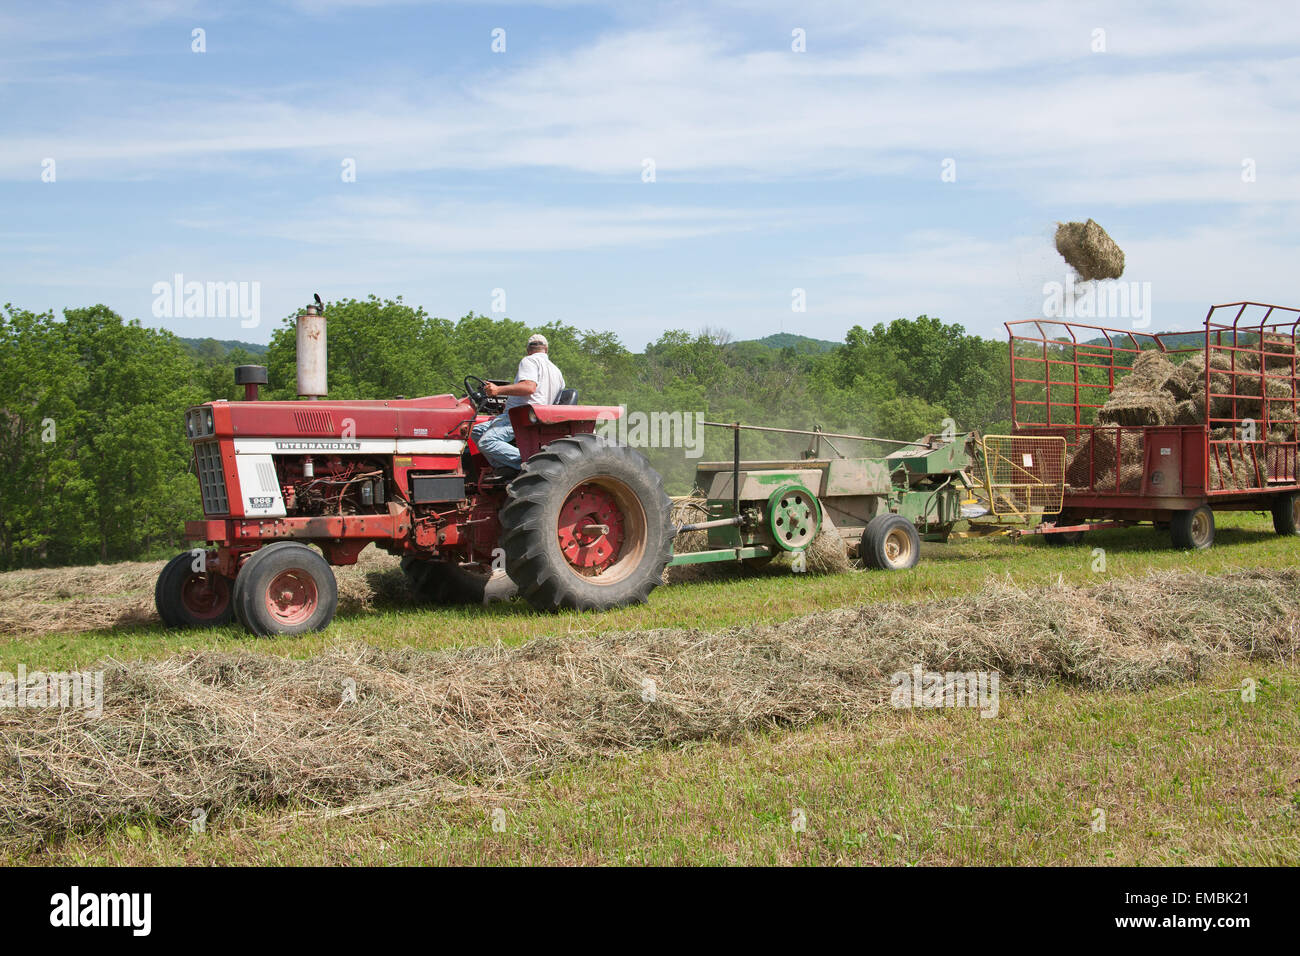 Man on International Harvester Farmall tractor, baling hay in a field with a bale flying in the air, near Galena, Illinois, USA Stock Photo